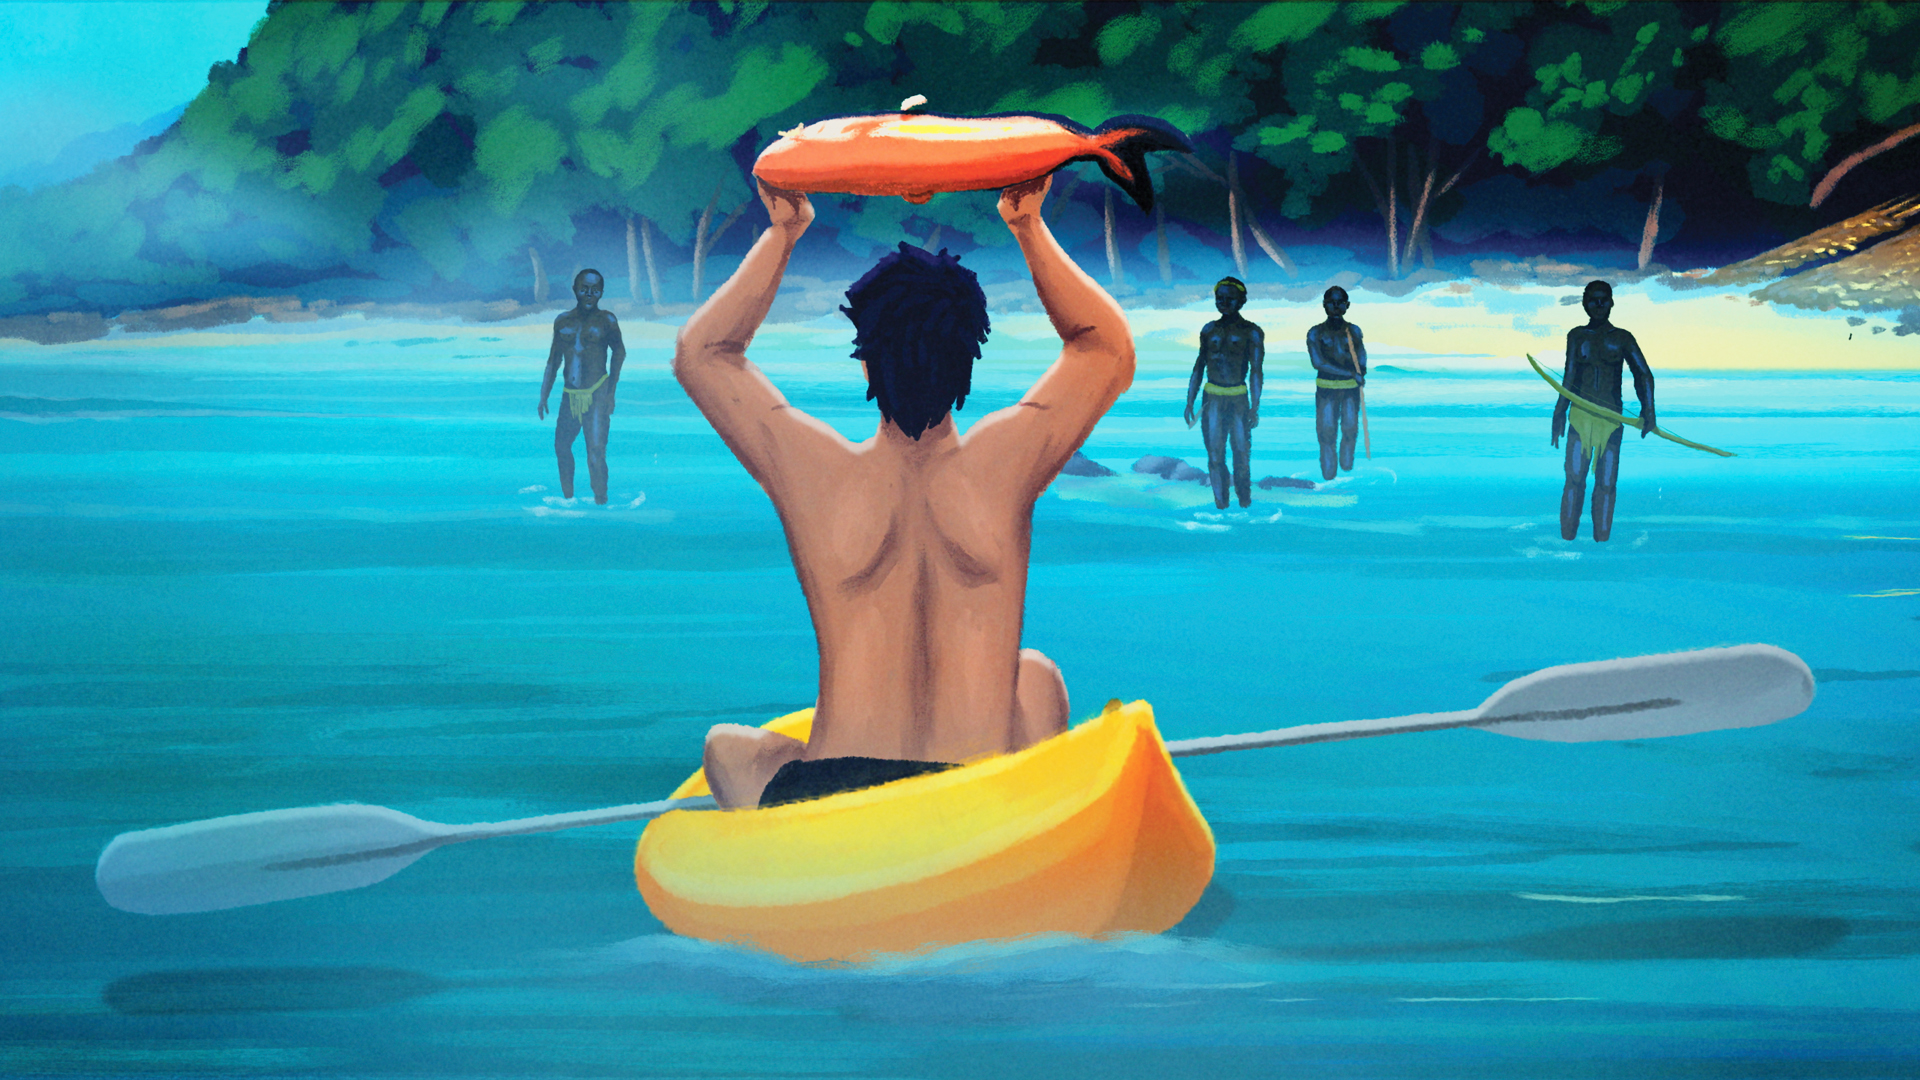 animated scene of man in kayak being approached by people on a beach